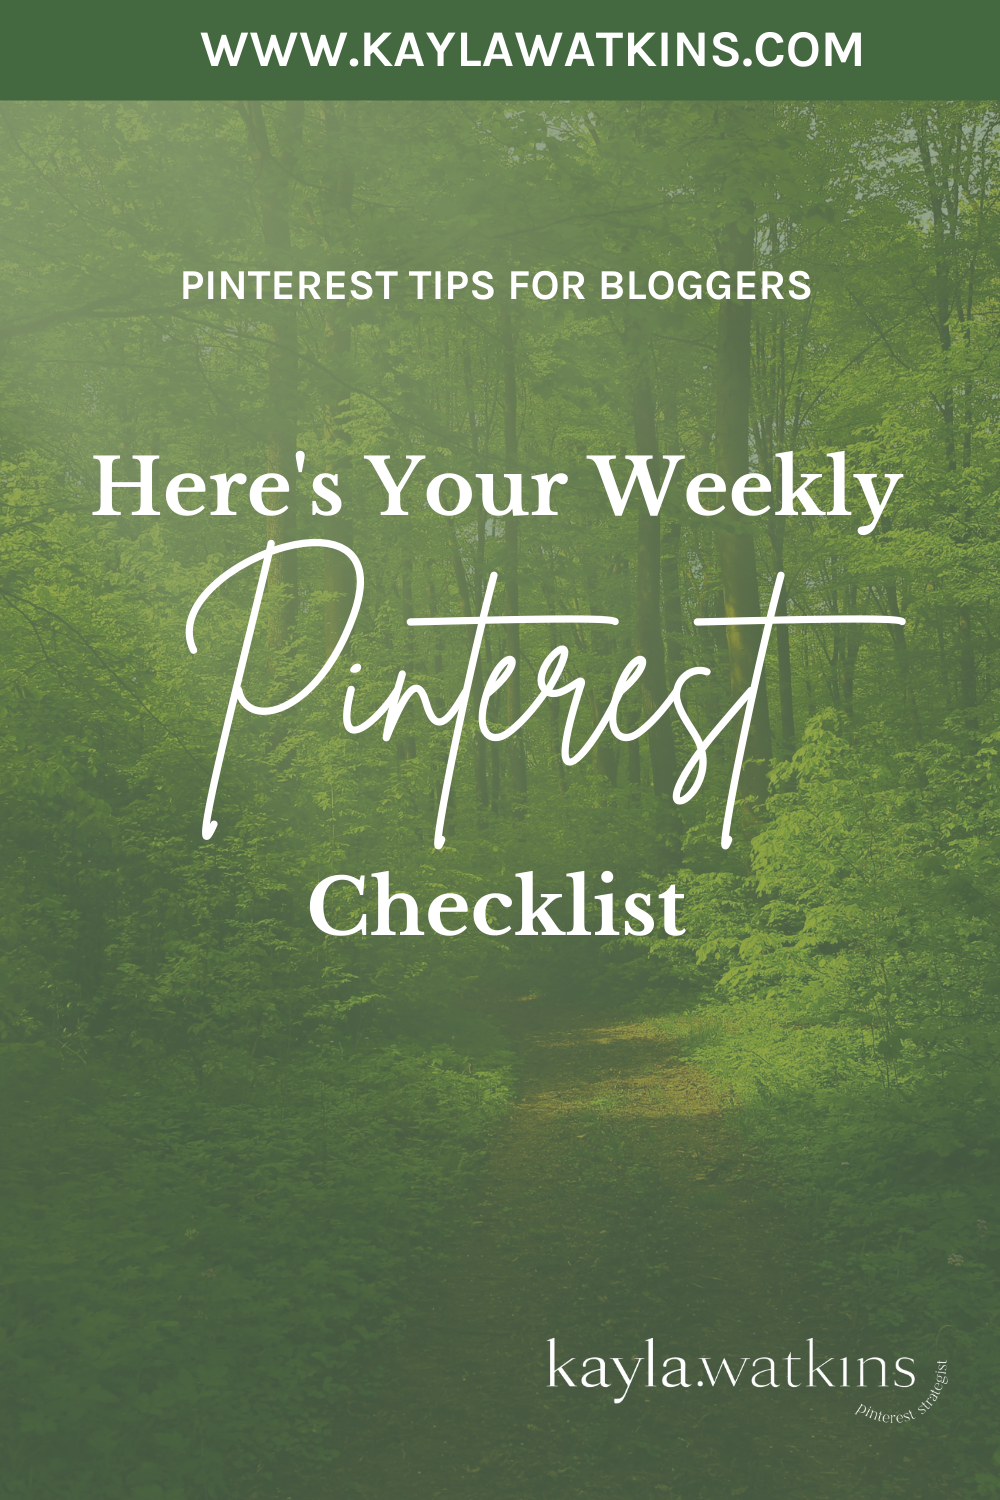 Weekly Pinterest Checklist for bloggers shared by Pinterest Expert for Bloggers Kayla Watkins